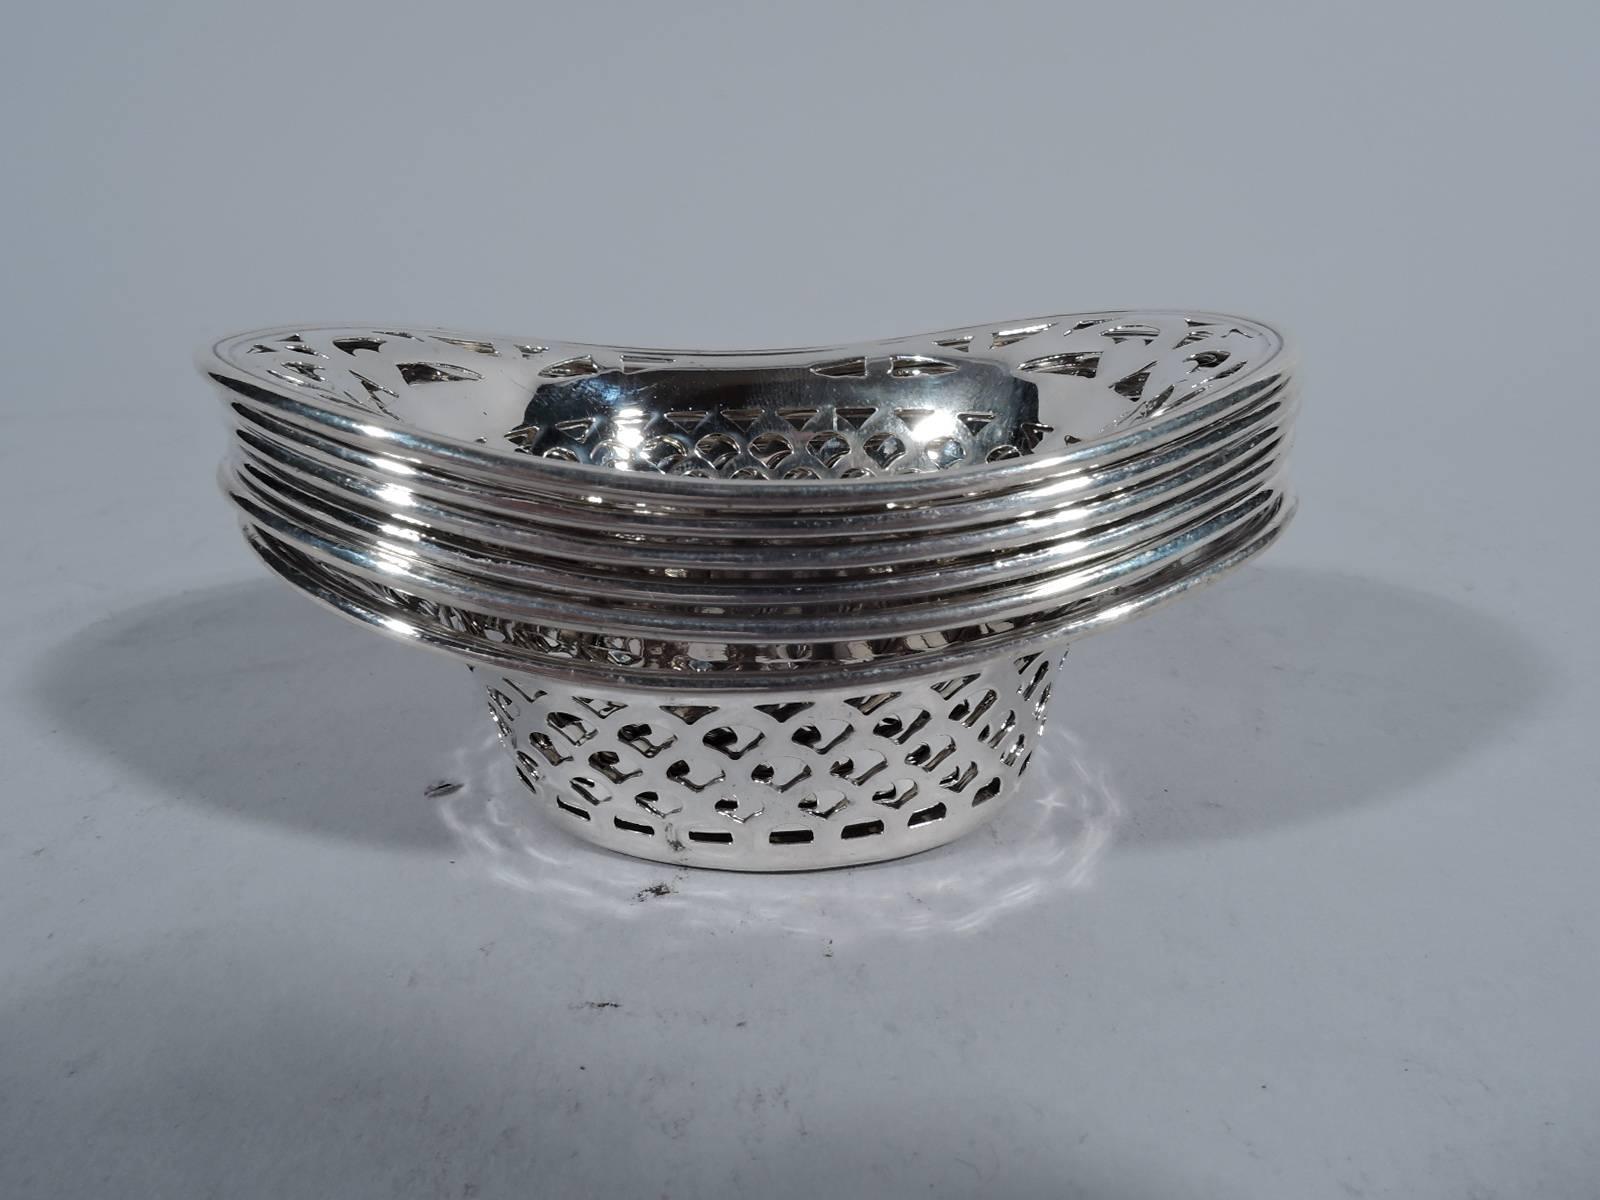 Set of six Edwardian sterling silver nut bowls. Made by Webster in North Attleboro, Mass., circa 1910. Each: Solid oval well, pierced fish scale sides and flared rim with pierced scrollwork. Monogram engraved in well. Hallmarked. Total weight: 3.4